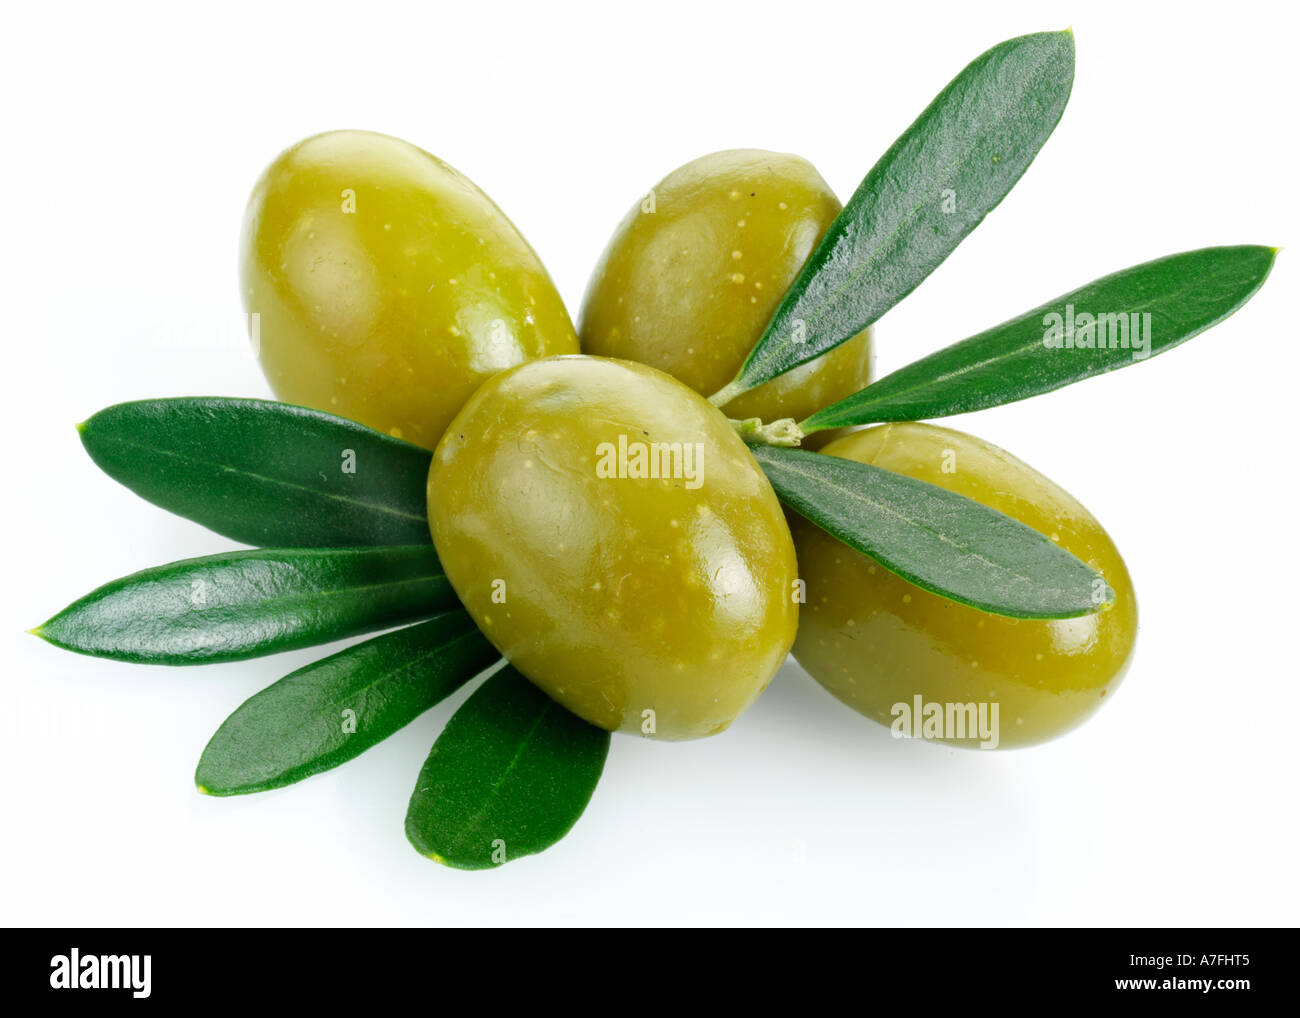 FOUR GREEN OLIVES Stock Photo